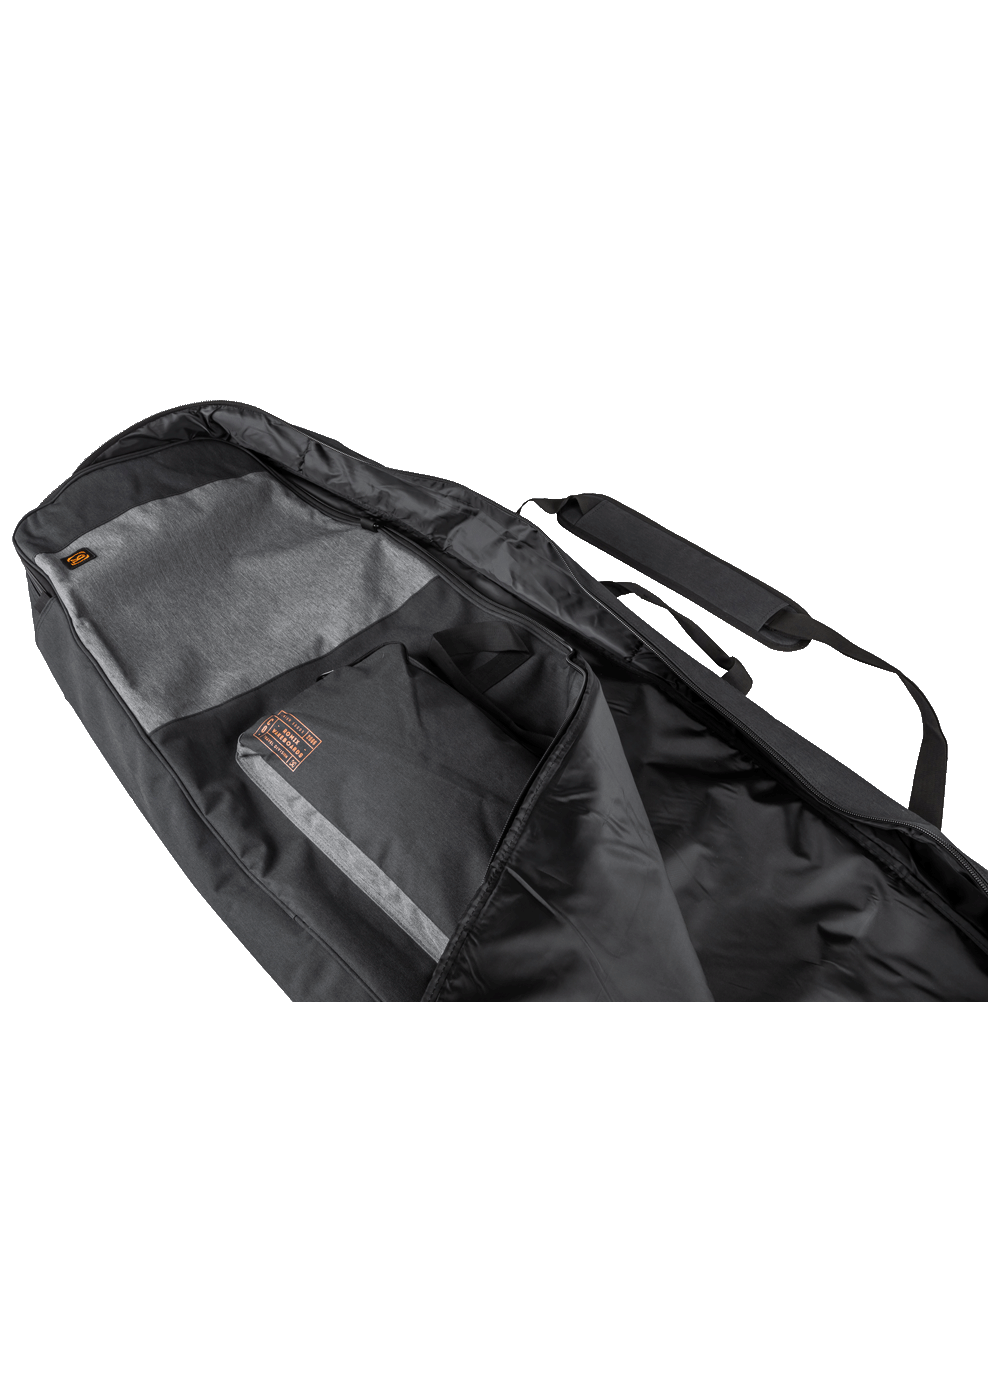 2022 Ronix Bags Squadron Padded Board Case Inset 3 copy